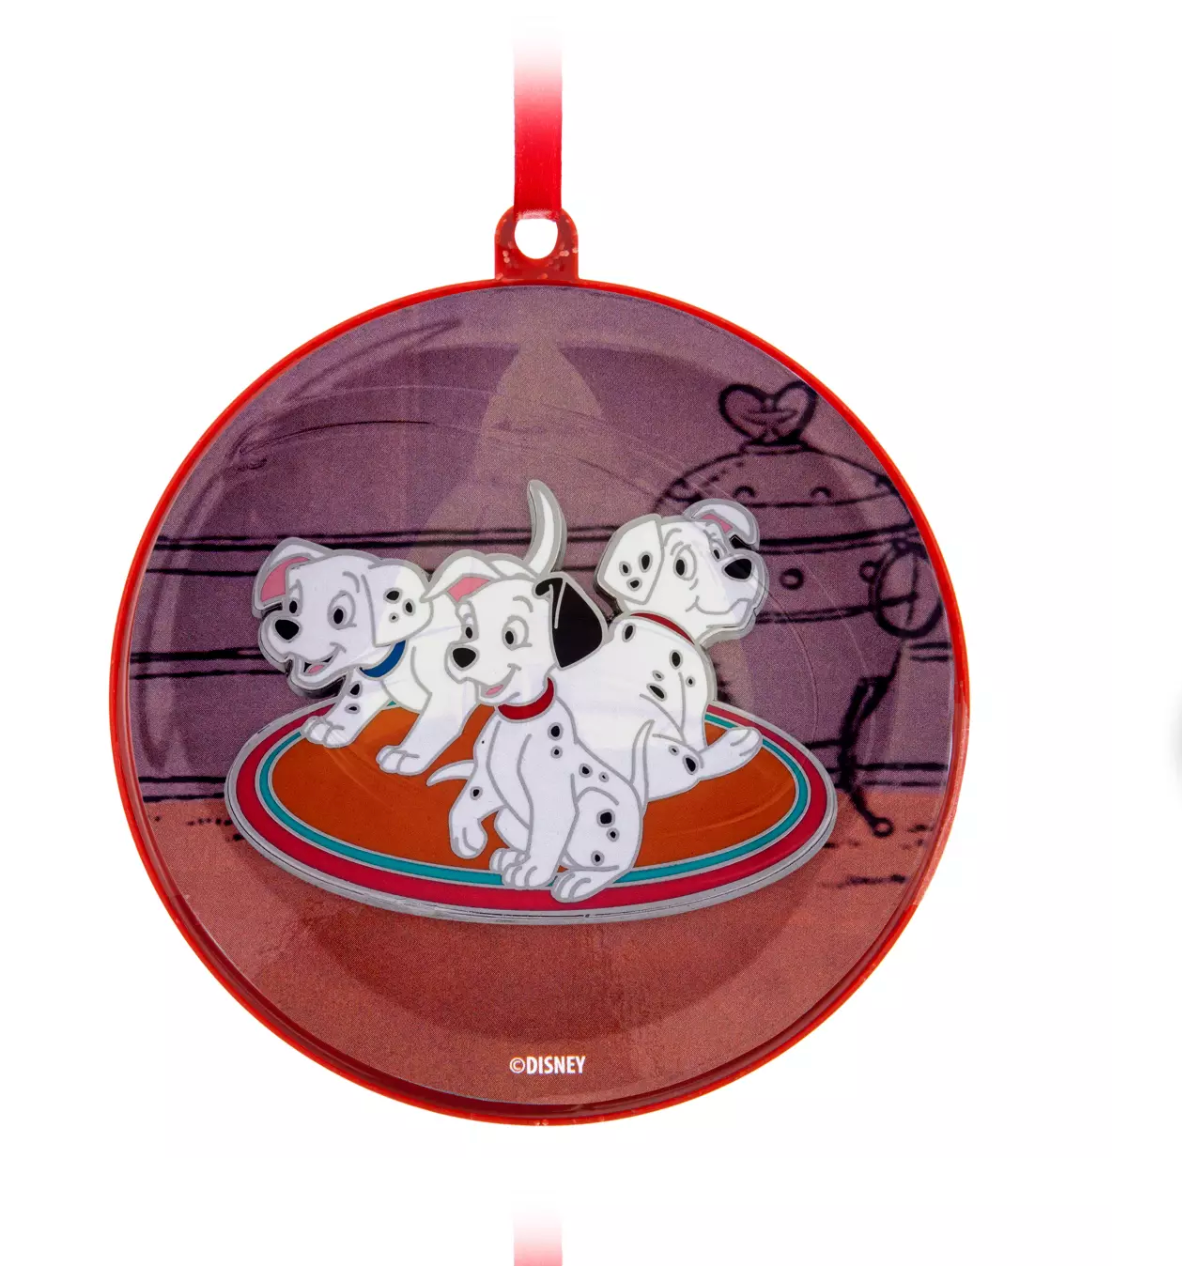 Disney 101 Dalmatians Pin Holiday Christmas Ornament Surprise Limited New w Tag